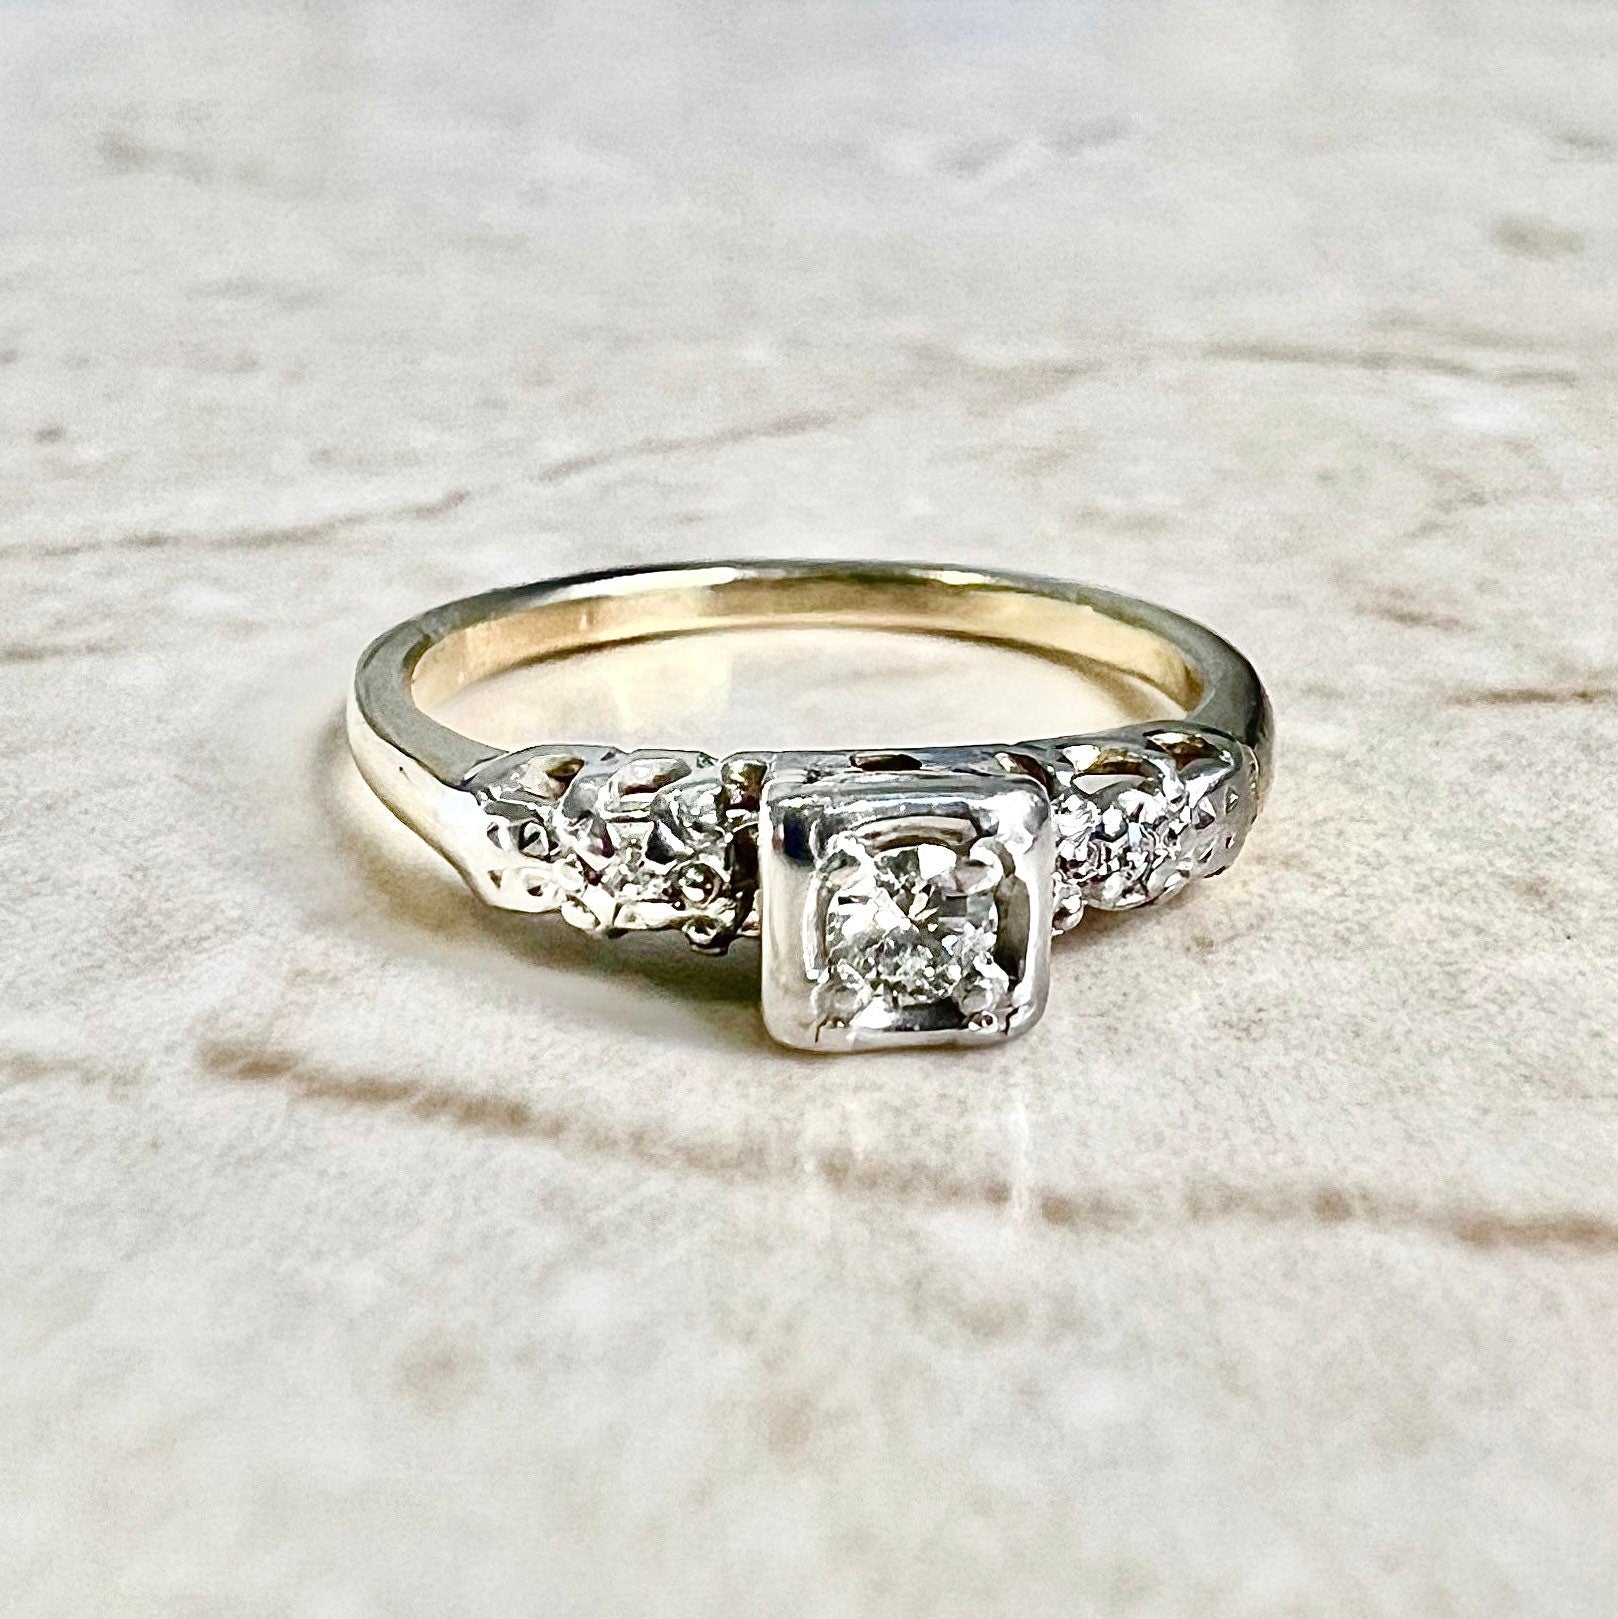 14K Yellow & White Gold Diamond Engagement Ring Circa 1940, size 7.75 -  Colonial Trading Company